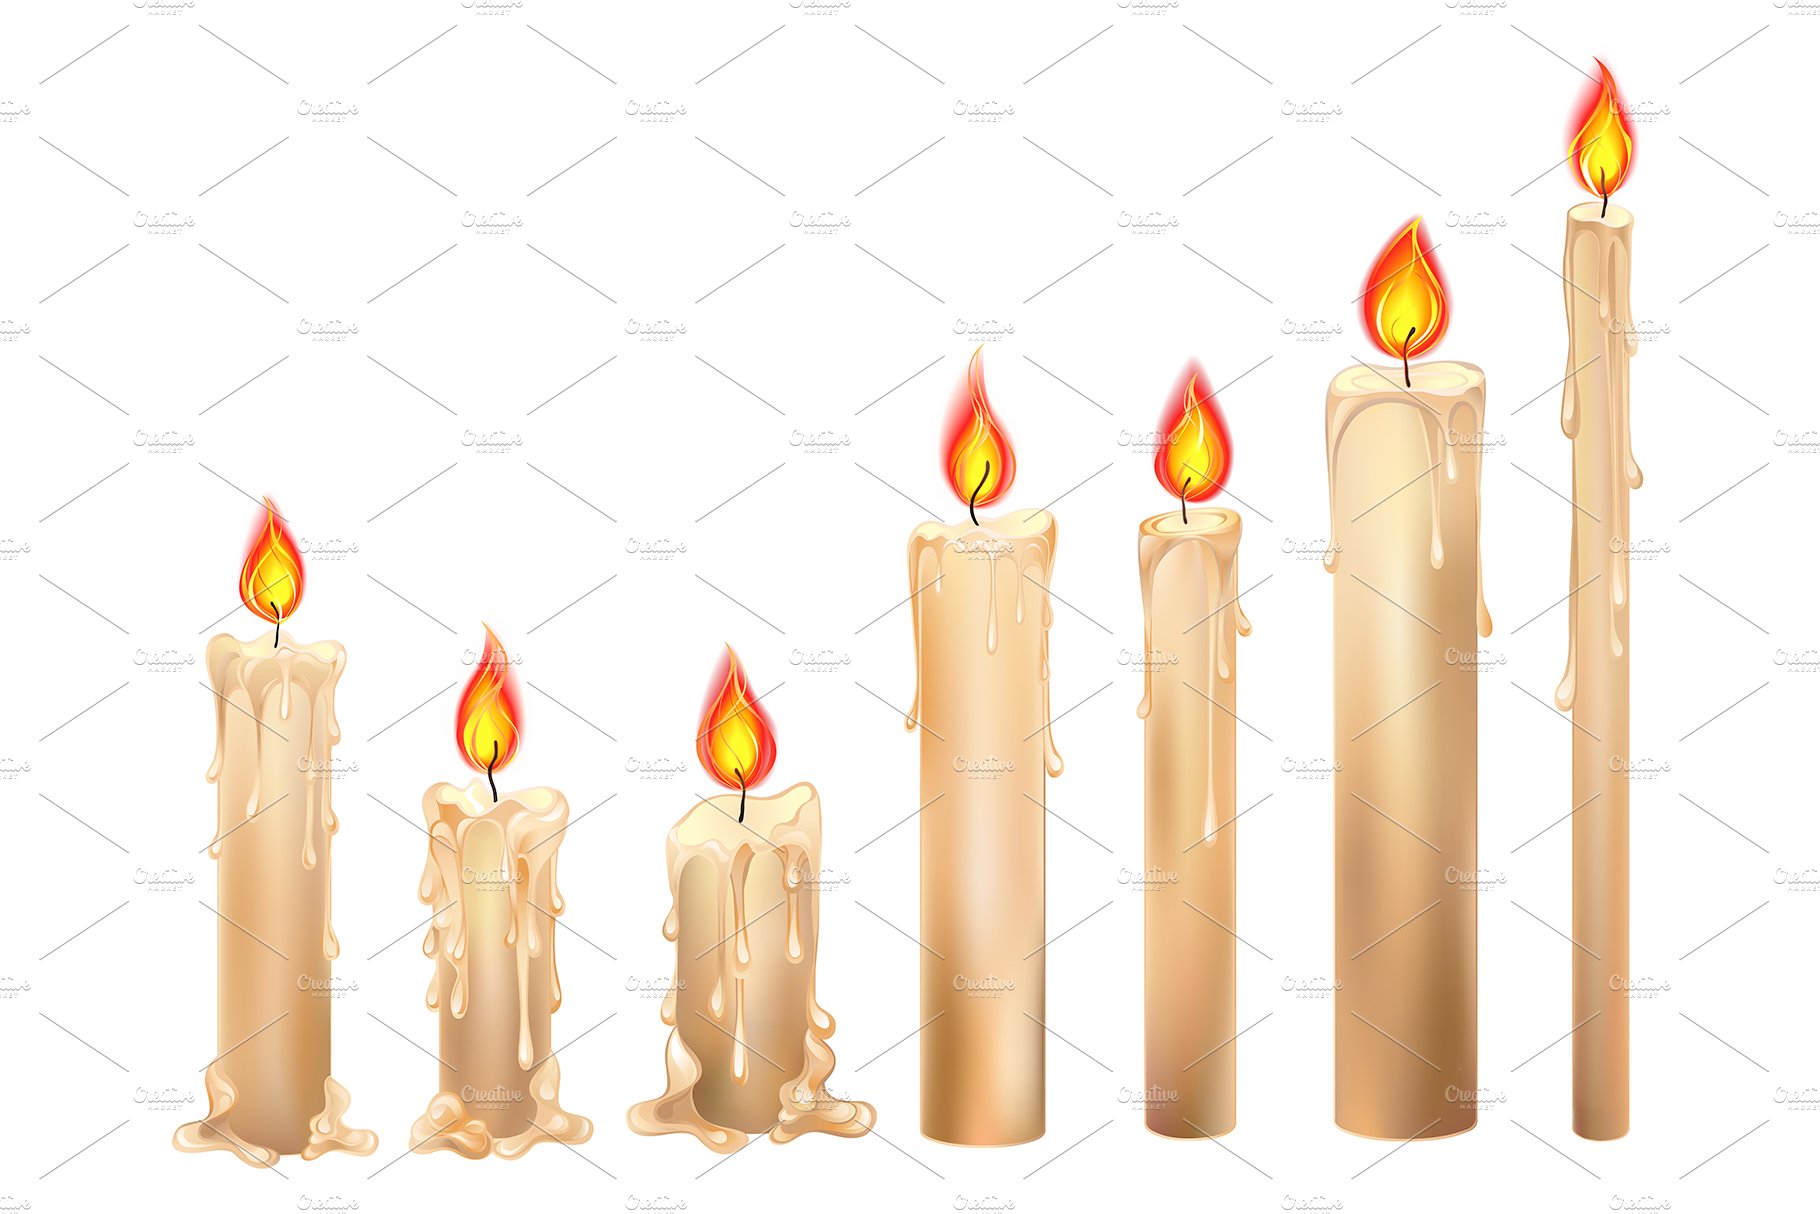 Wax Candles cover image.